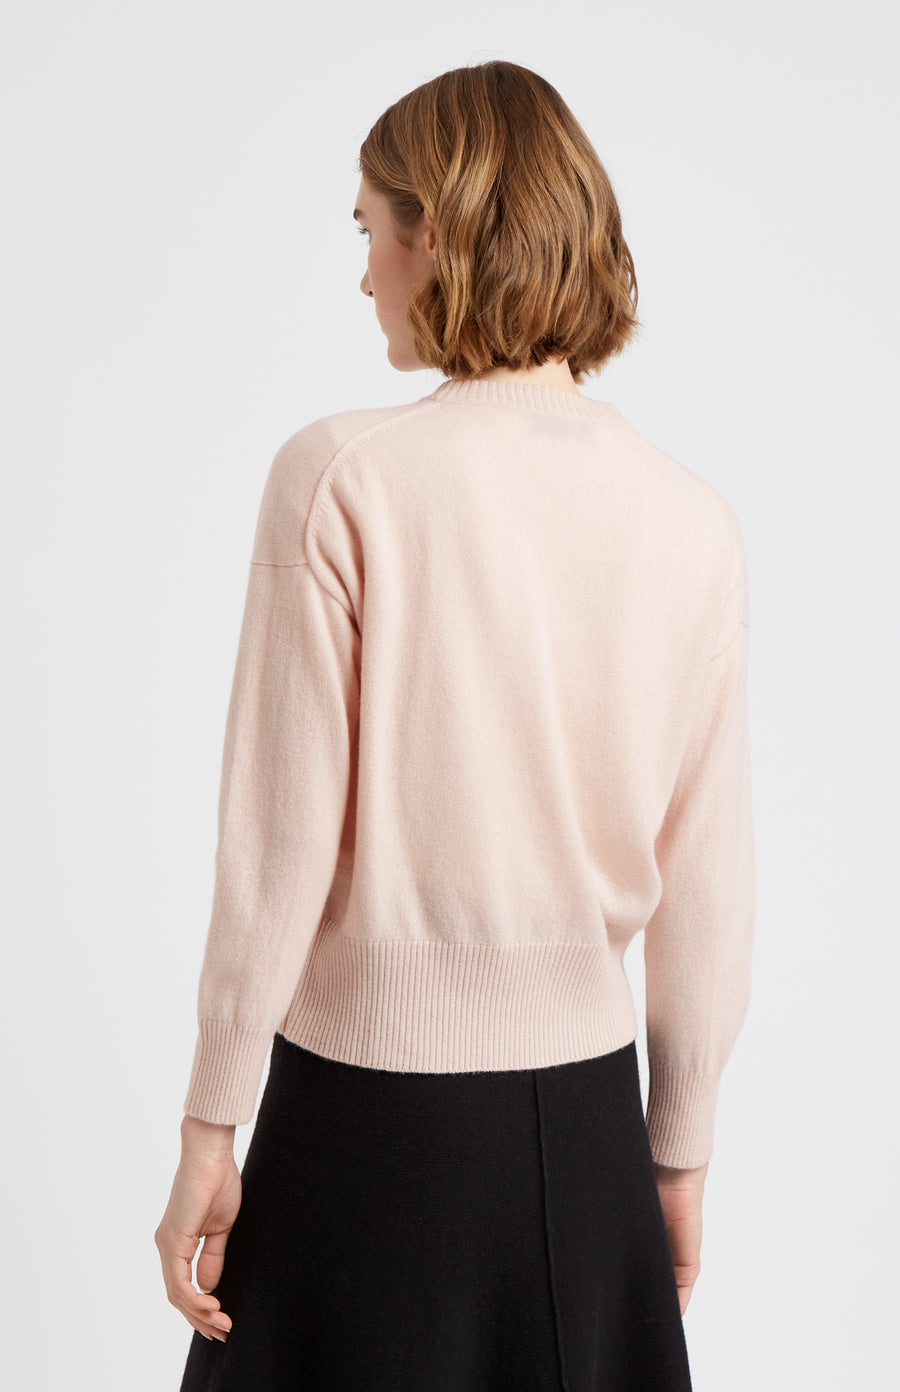 Pringle of Scotland Lightweight Round Neck Cashmere jumper in Pink rear view